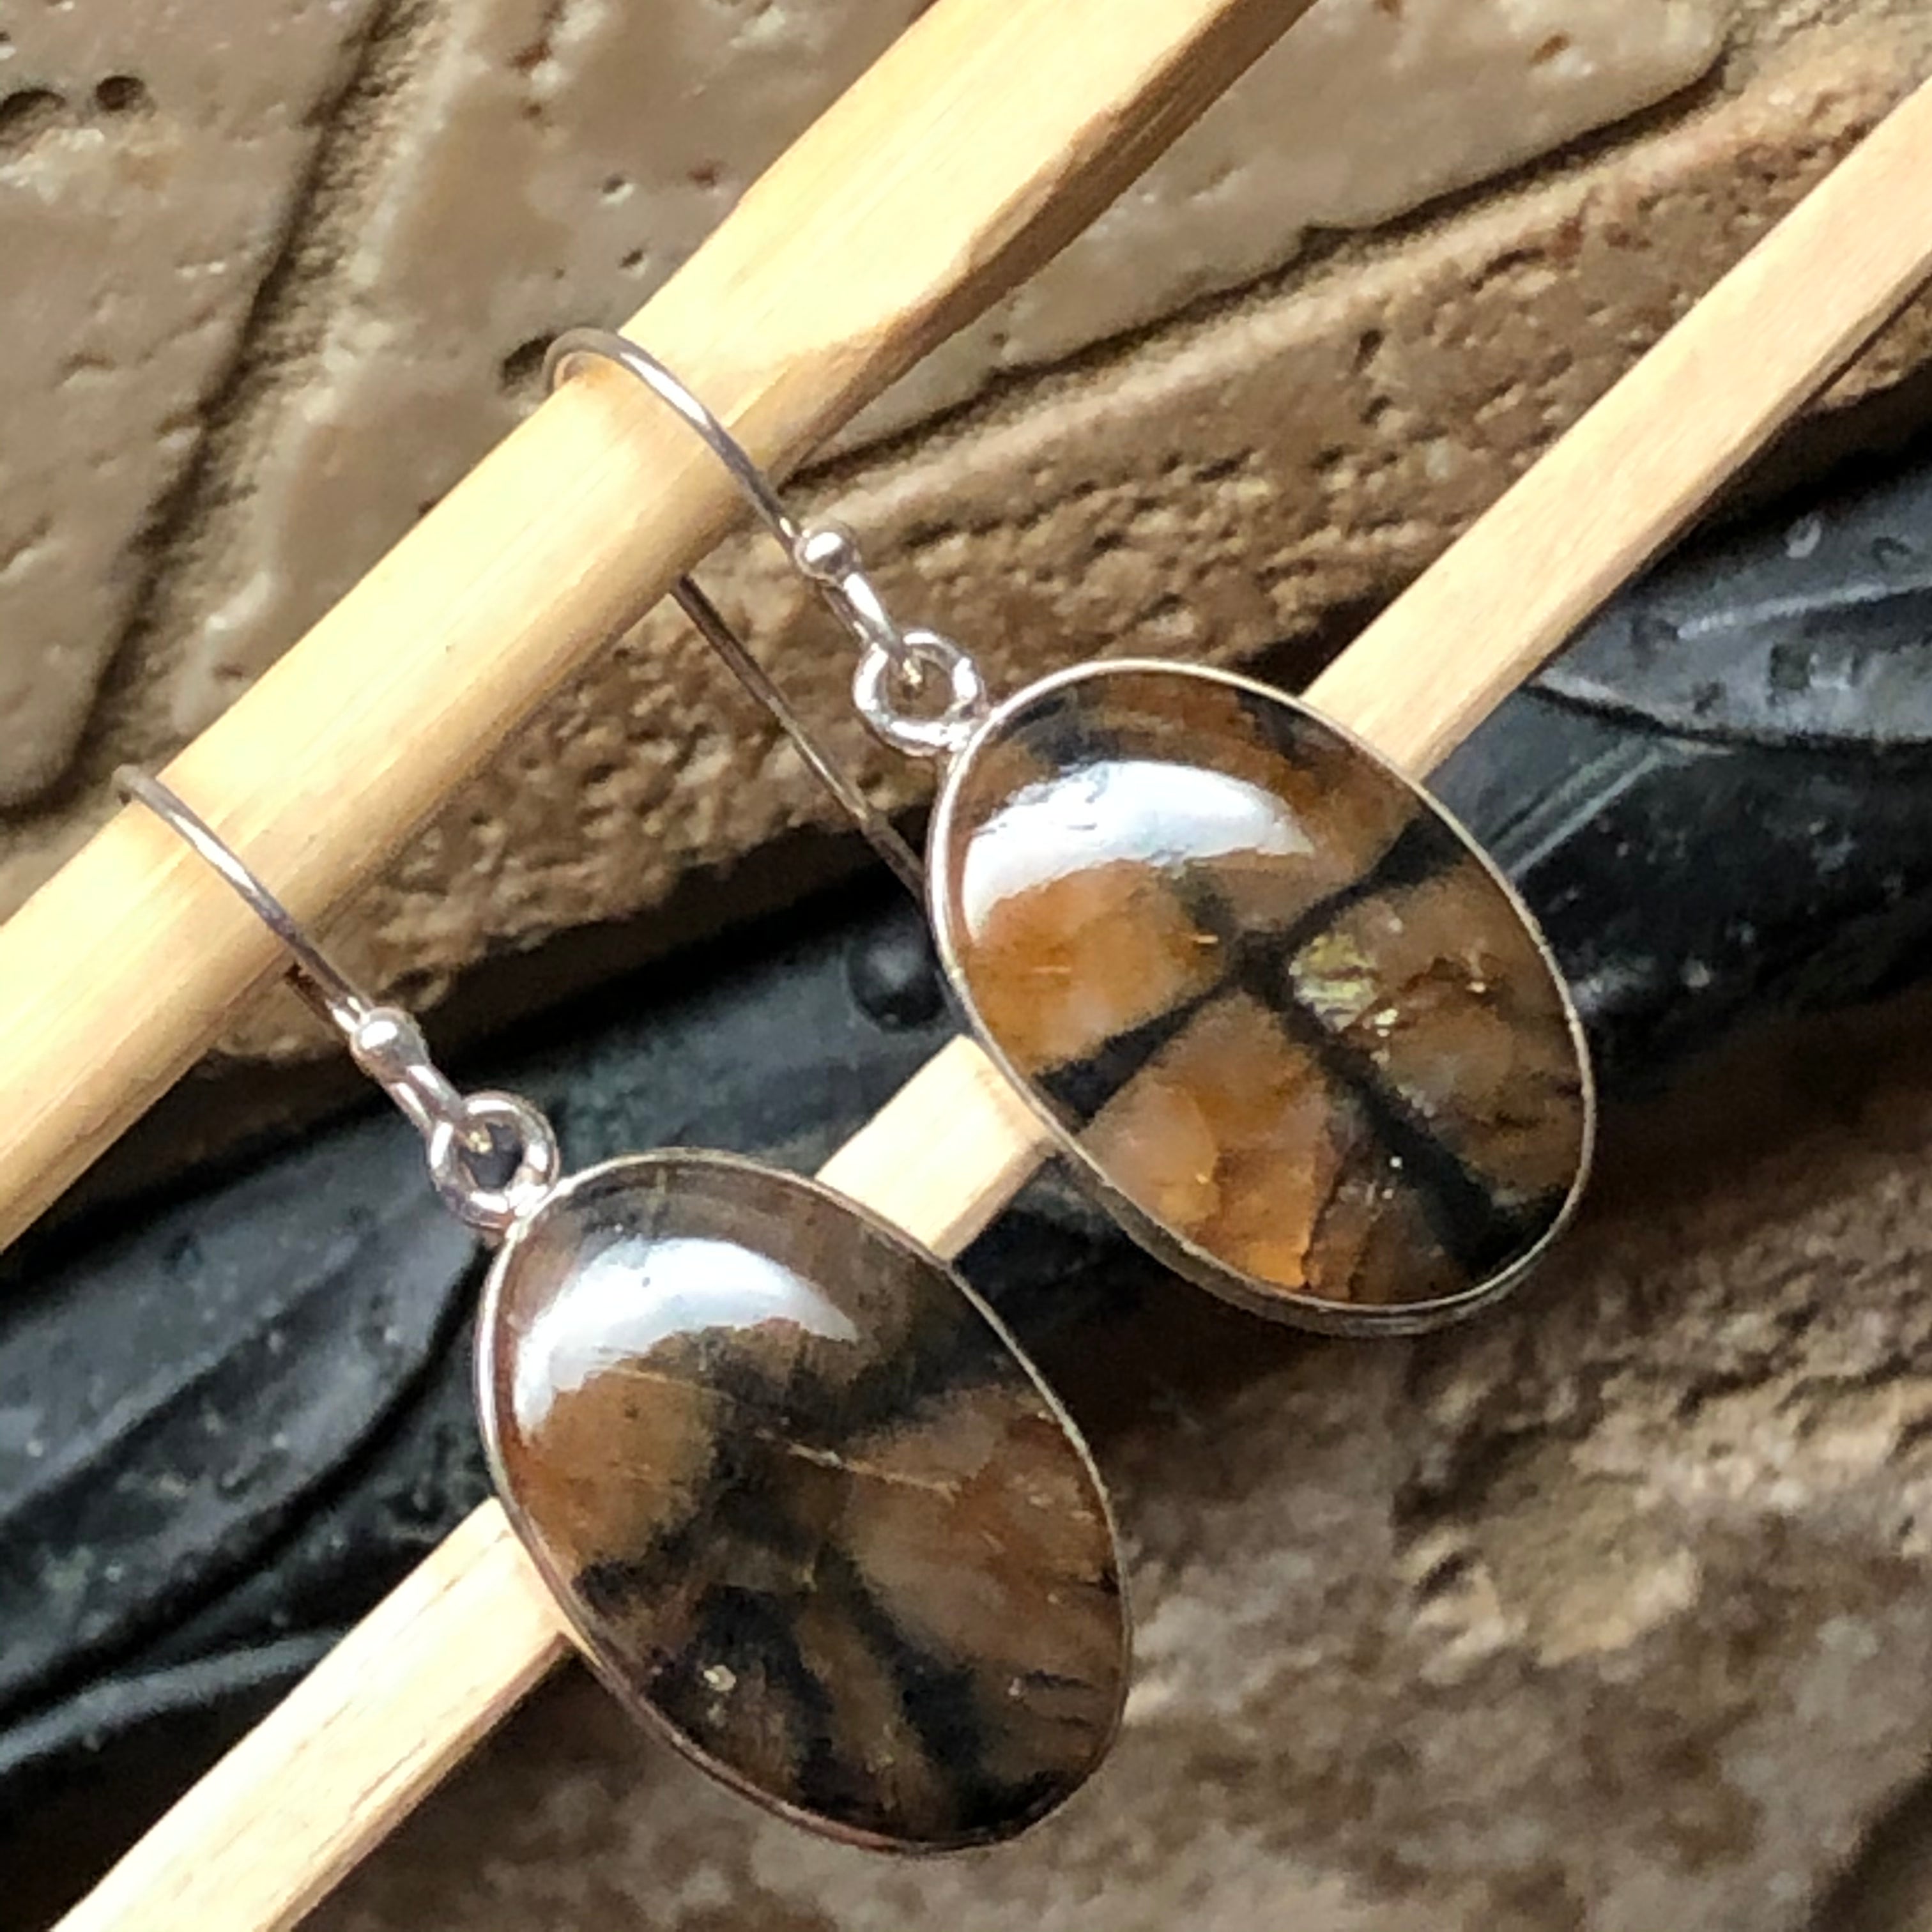 Natural Chiastolite 925 Solid Sterling Silver Earrings 40mm - Natural Rocks by Kala